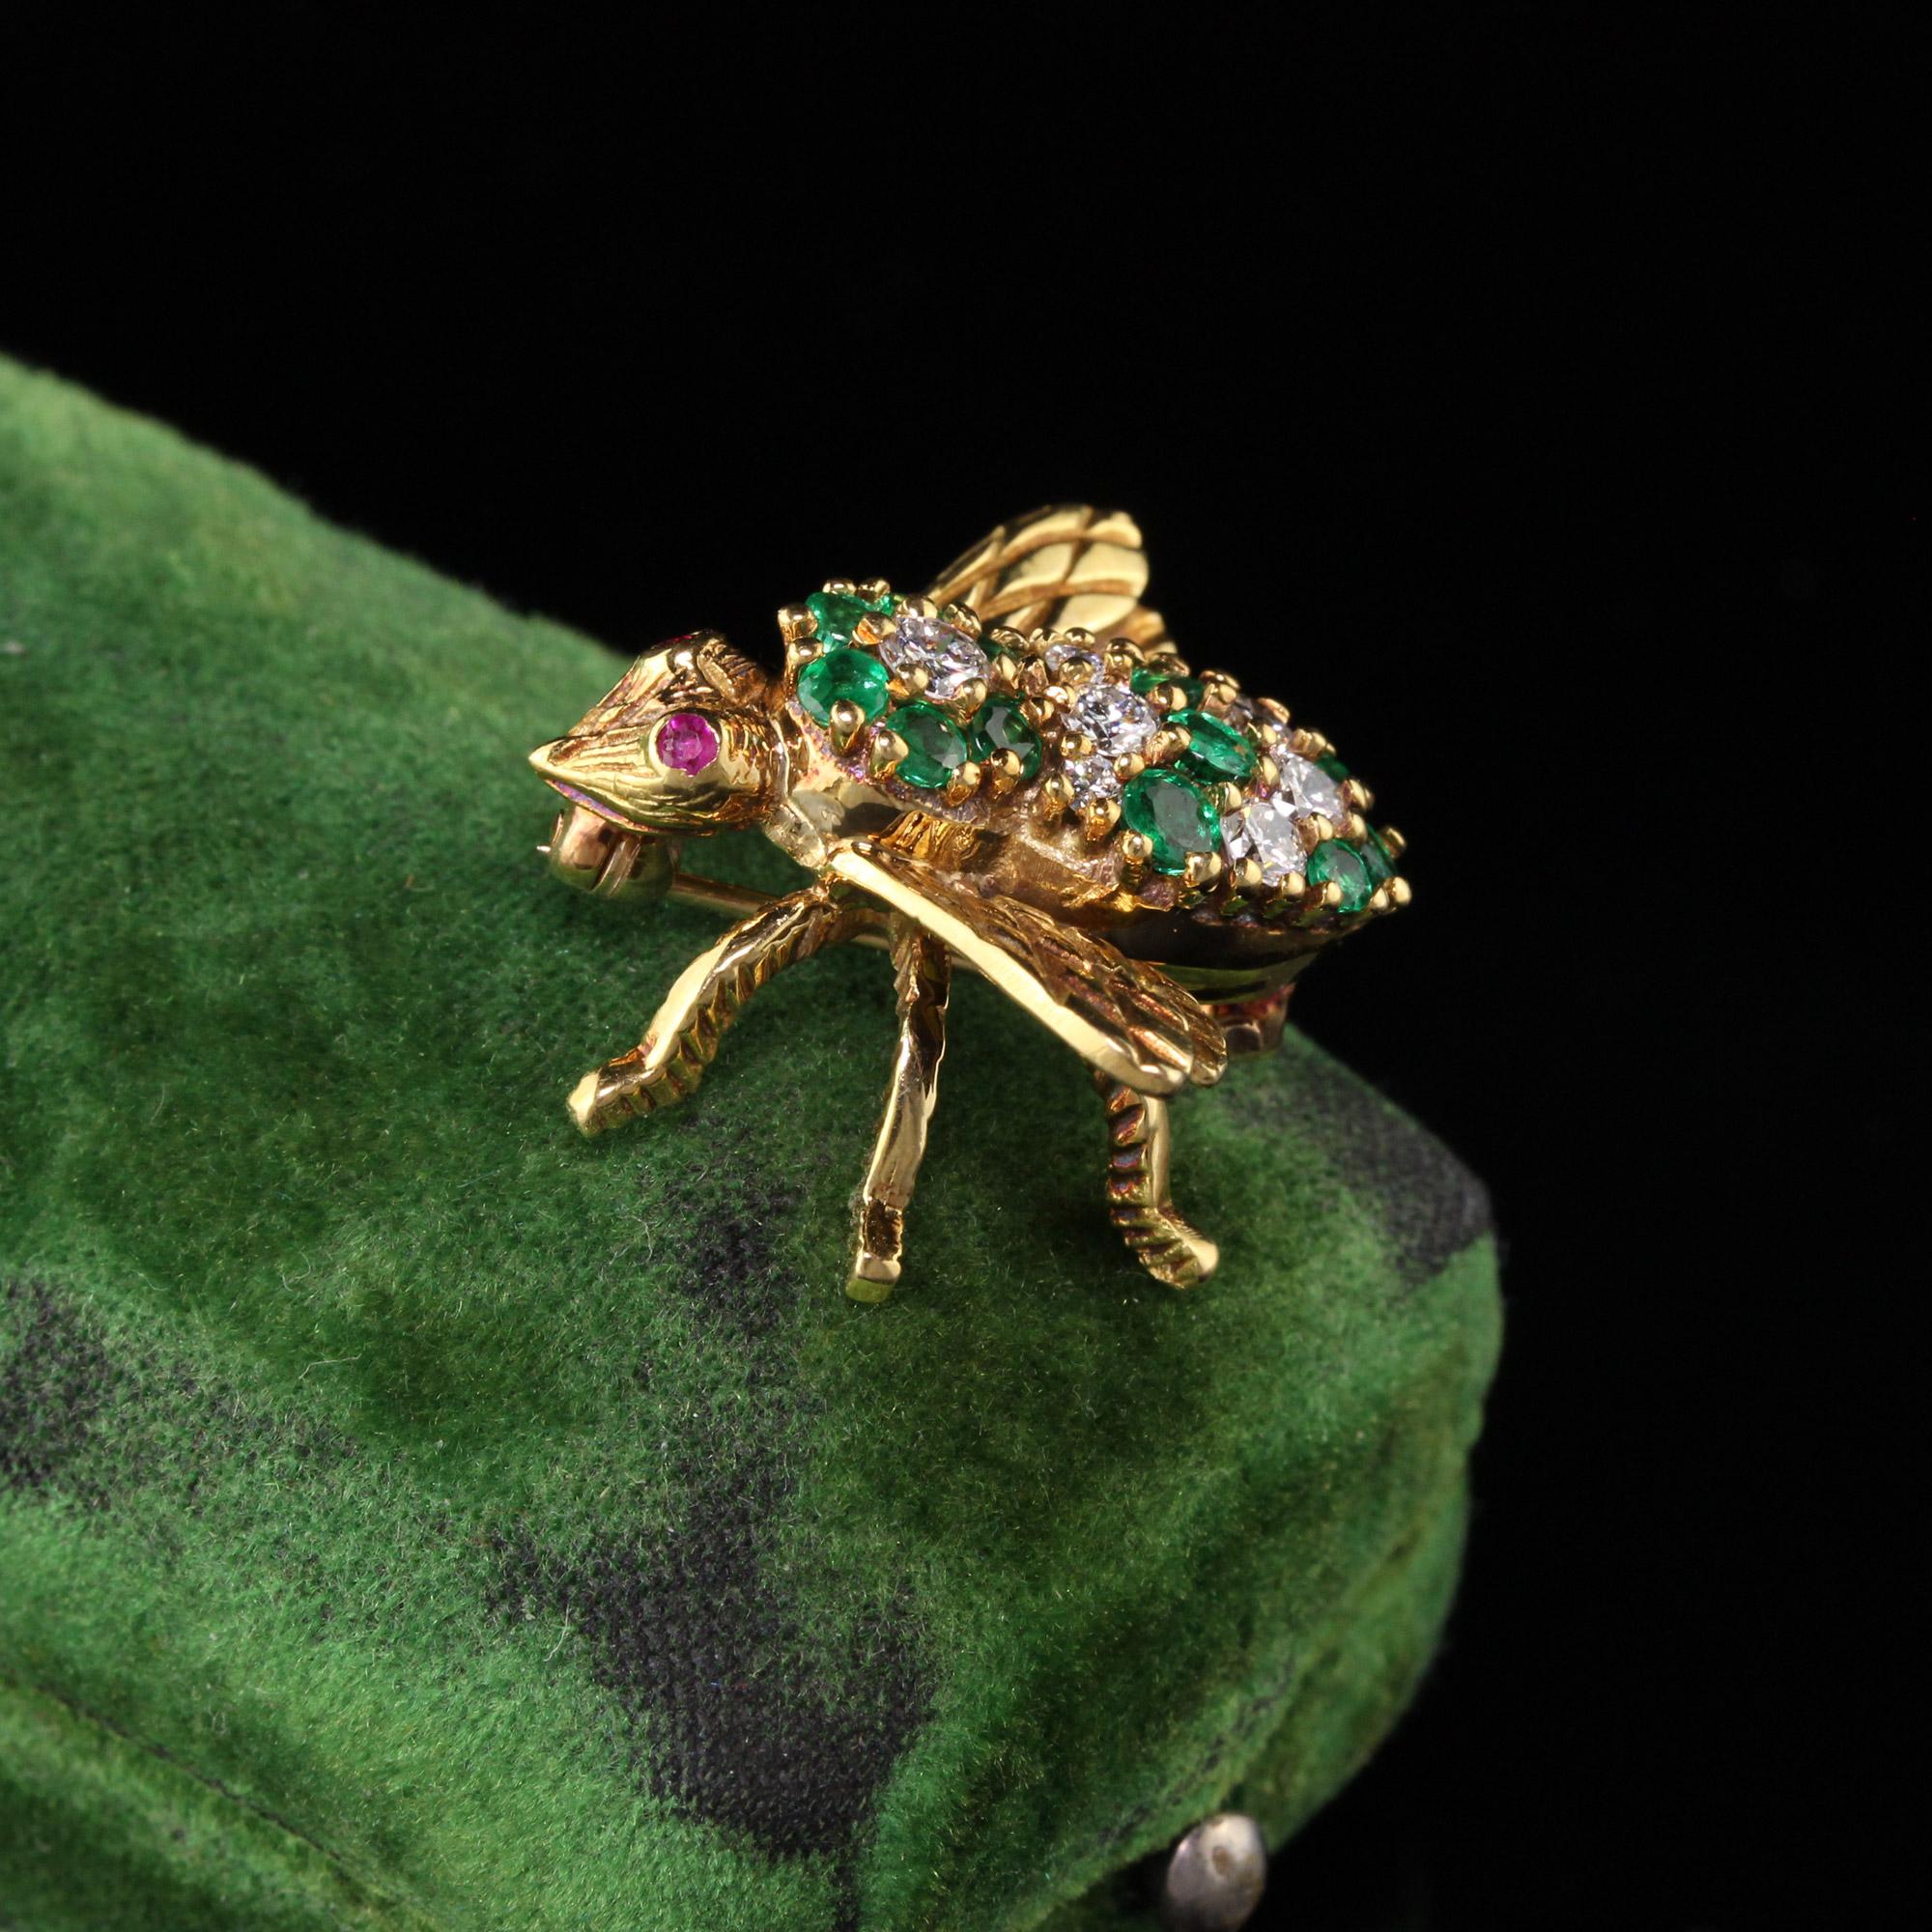 Stunning Henry Rosenthal Bee pin with diamonds, emeralds, and rubies.

Item #P0086

Metal: 18K Yellow Gold

Weight: 6.8 Grams

Diamond Weight: Approximately 0.30 cts

Diamond Color: H

Diamond Clarity: VS2

Emerald Weight: Approximately 0.50